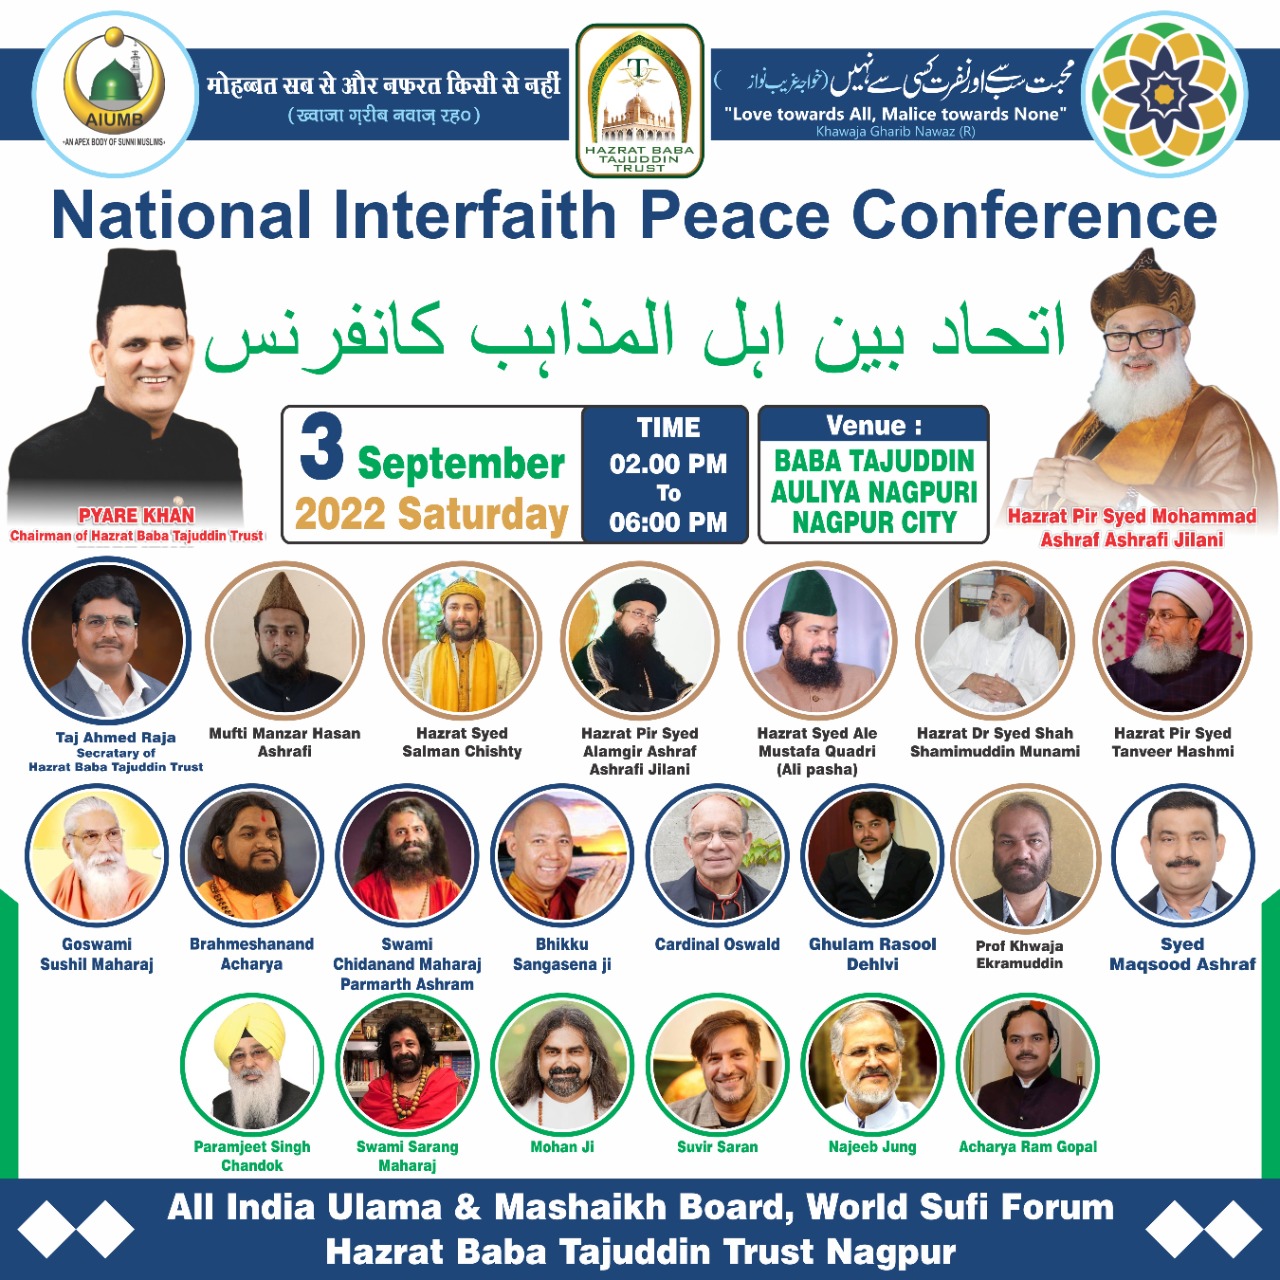 National Interfaith Peace Conference by AIUMB in Nagpur aims to help build a United India!